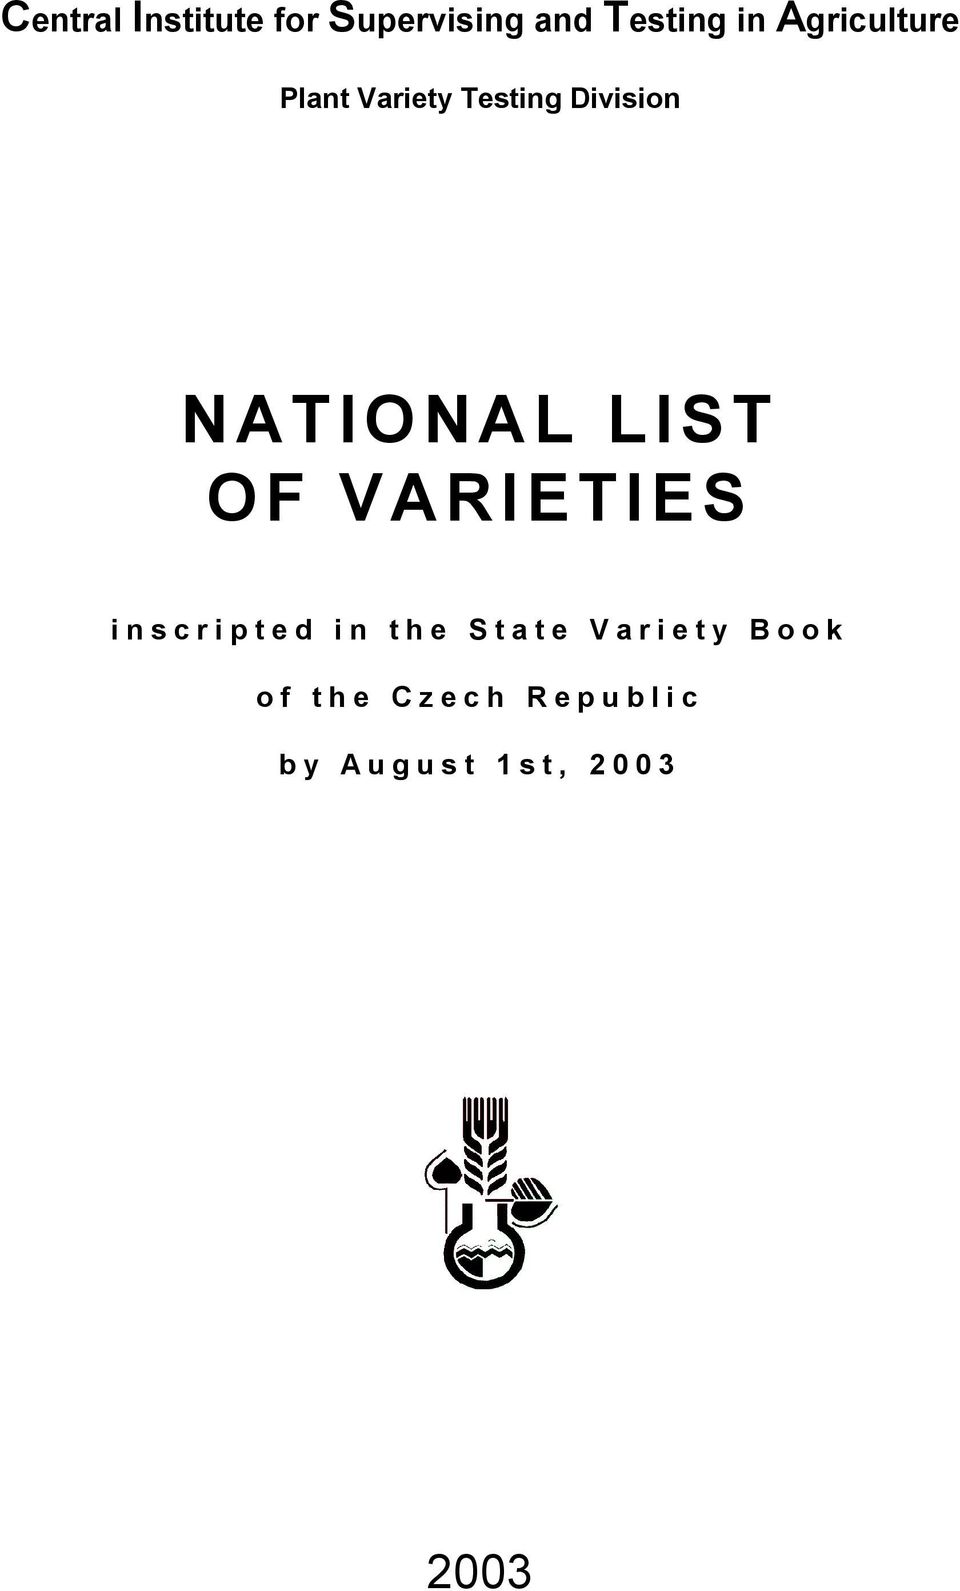 NATIONAL LIST OF VARIETIES inscripted in the State